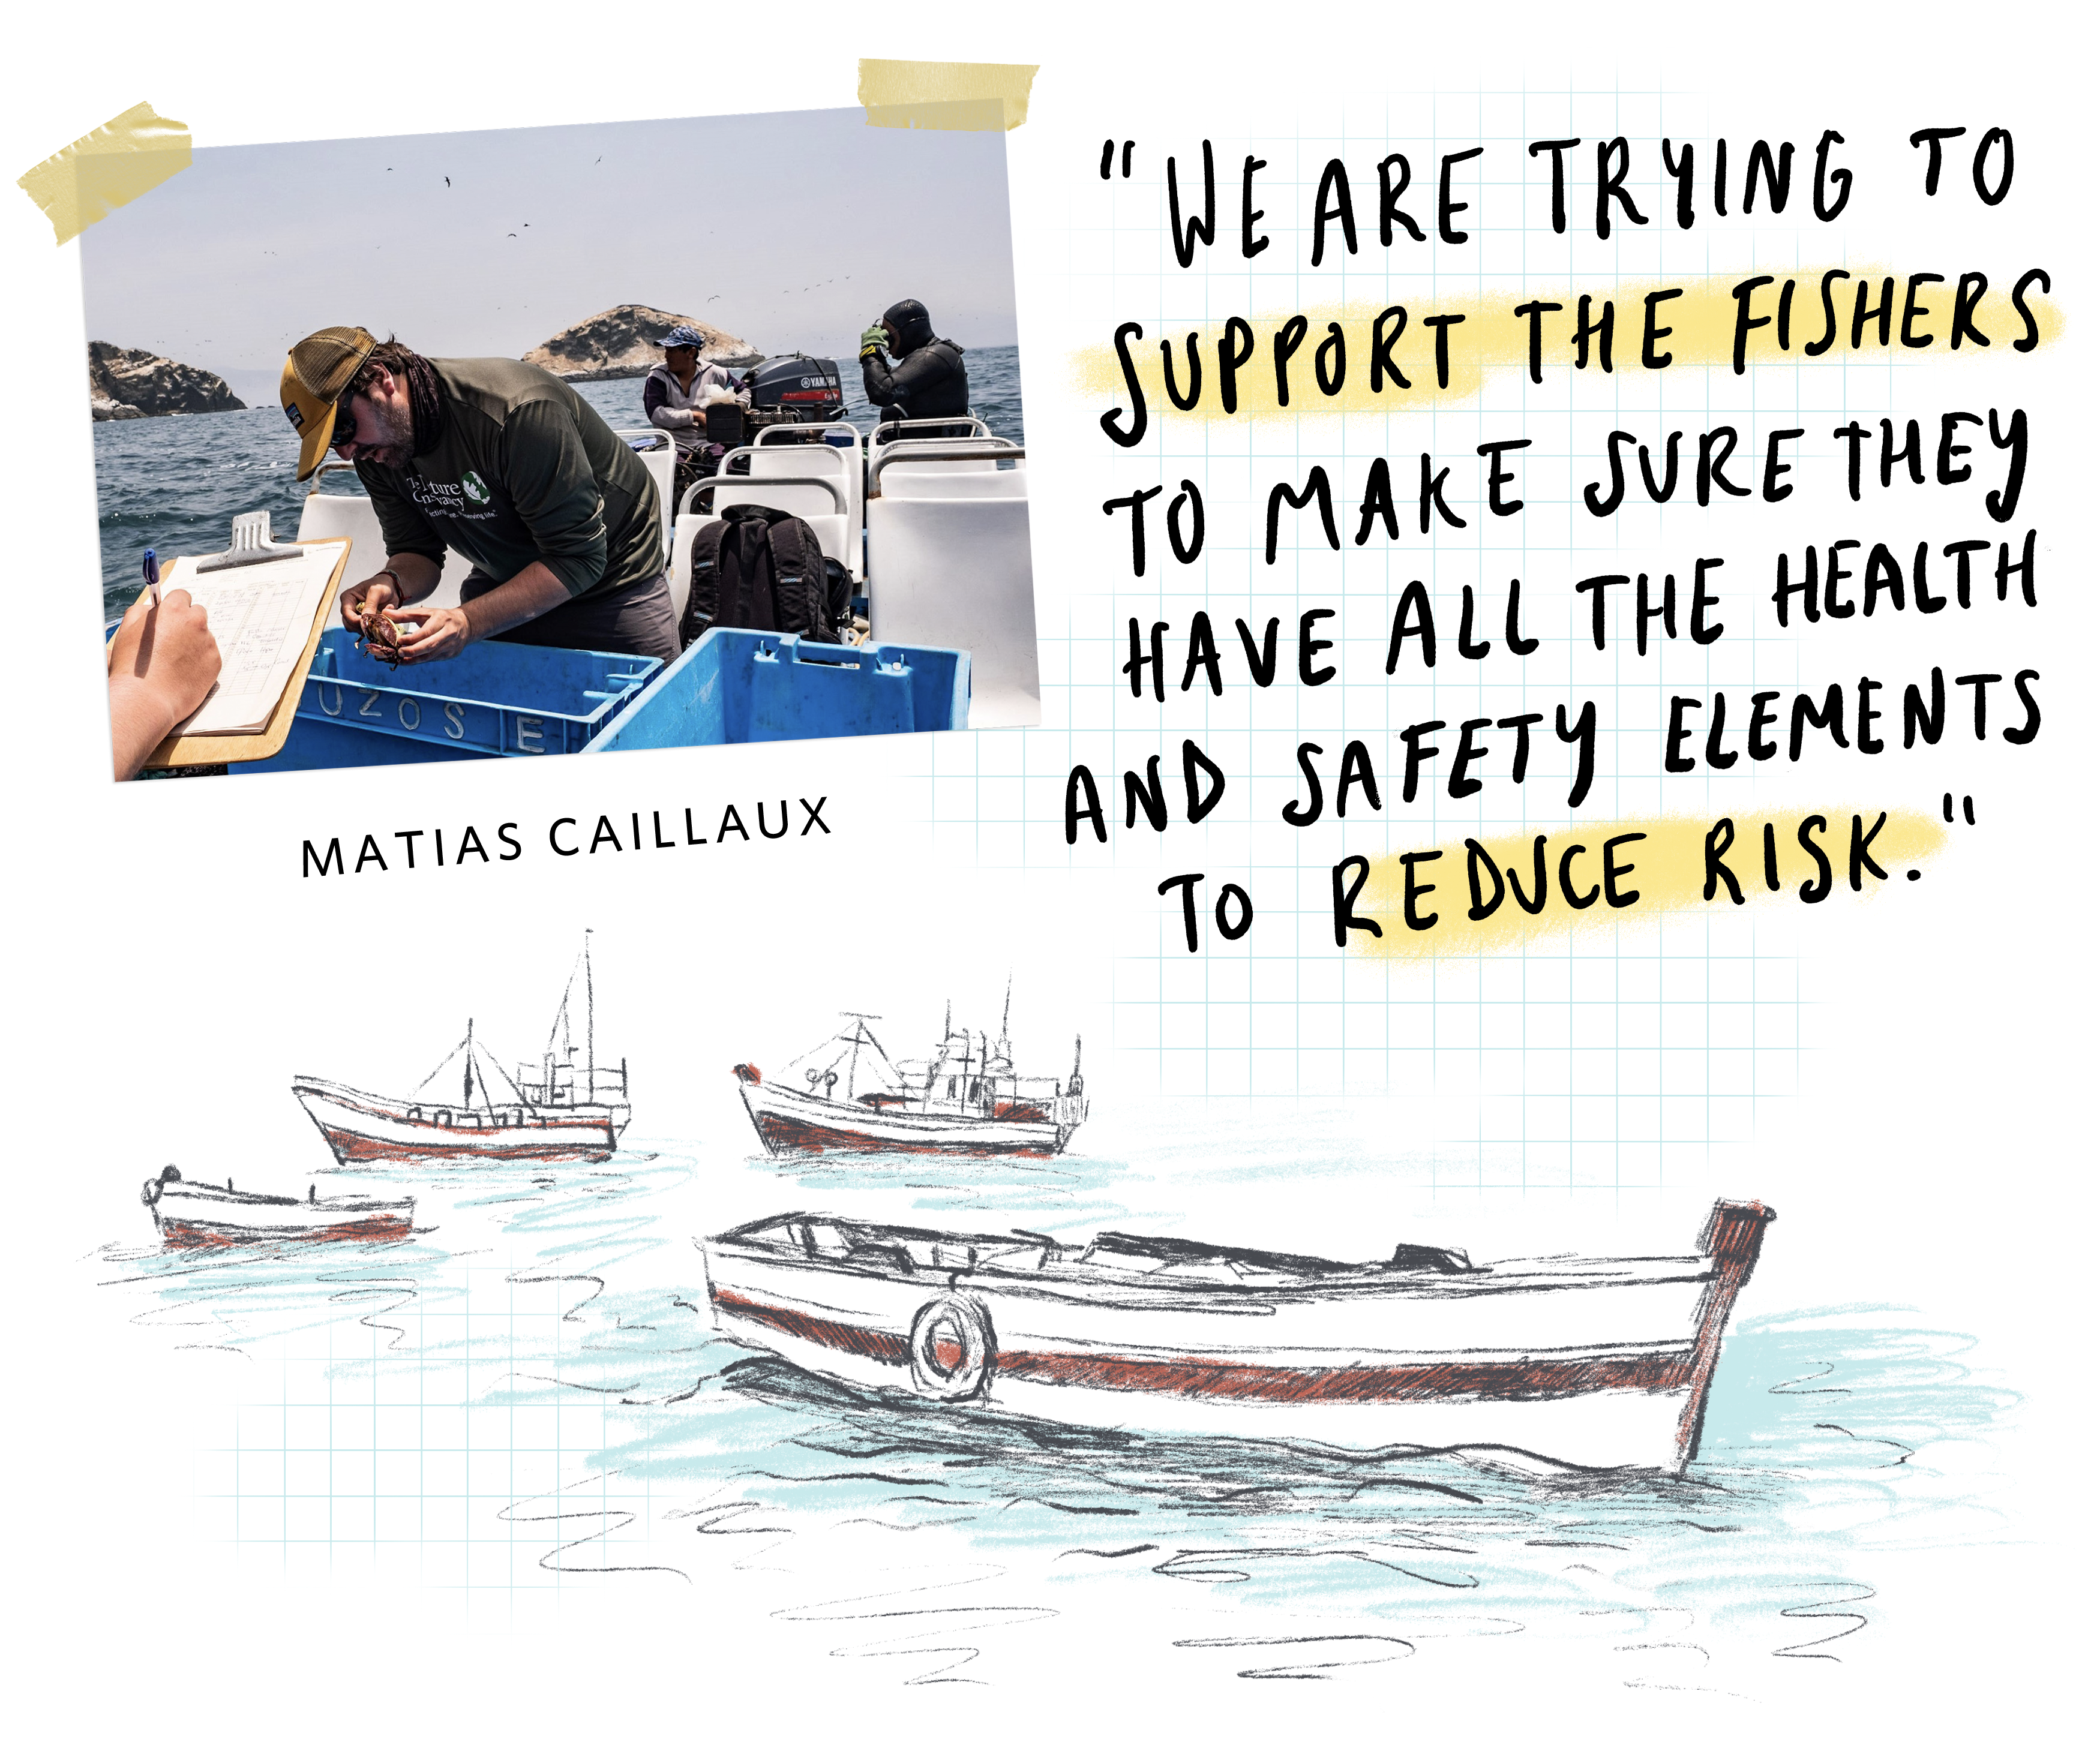 a collage including a photo of a man investigating shellfish on a boat, a handwritten quote that says 'we are trying to support the fishers to make sure they have all the health and safety elements to reduce risk' and below, a sketchy illustration of four fishing boats.